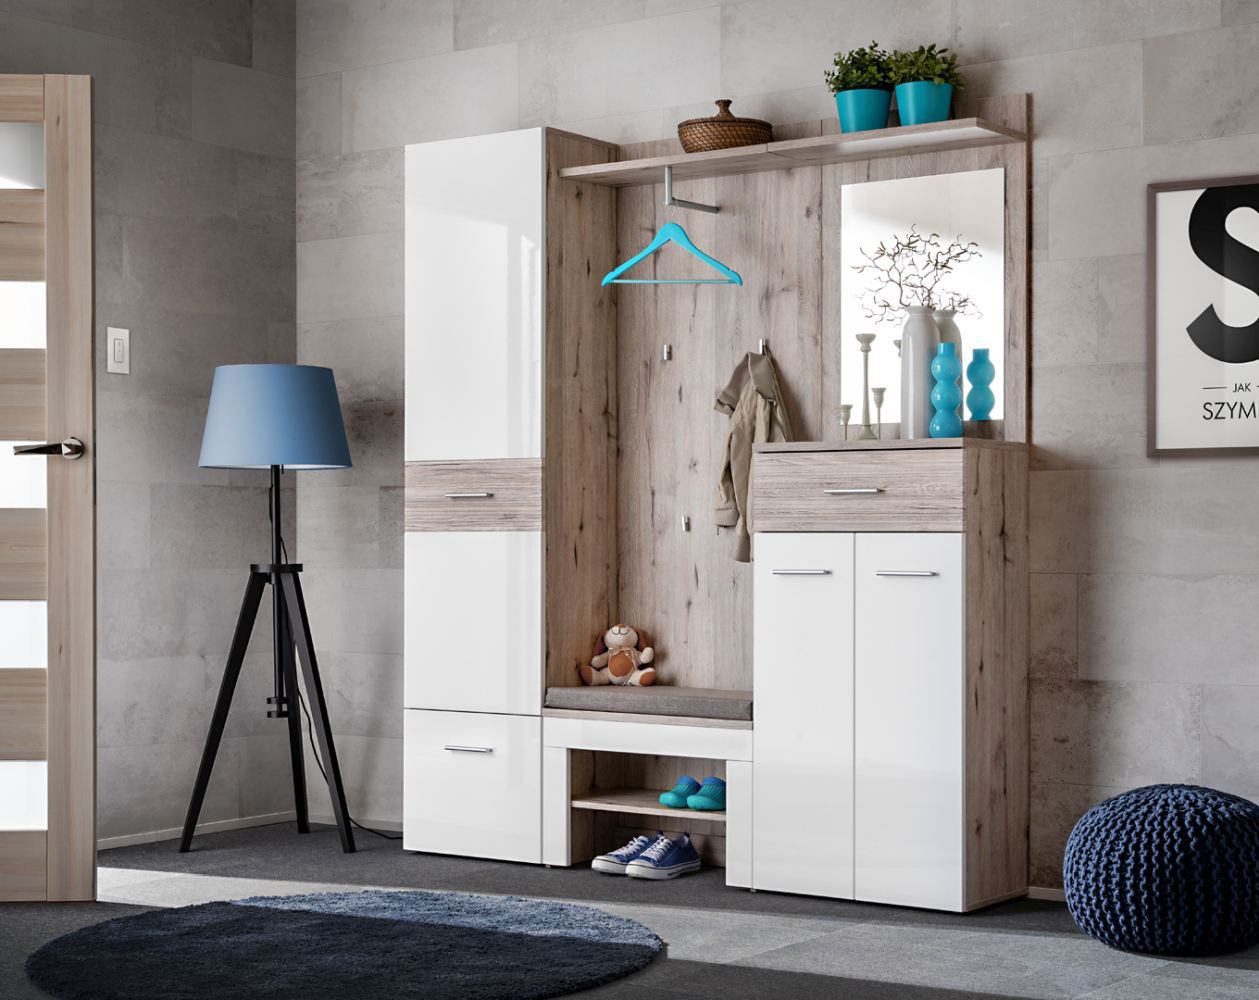 Wardrobe wall with bench Sviland 06, color: oak Wellington / white - dimensions: 200 x 170 x 35 cm (H x W x D), with seat cushion